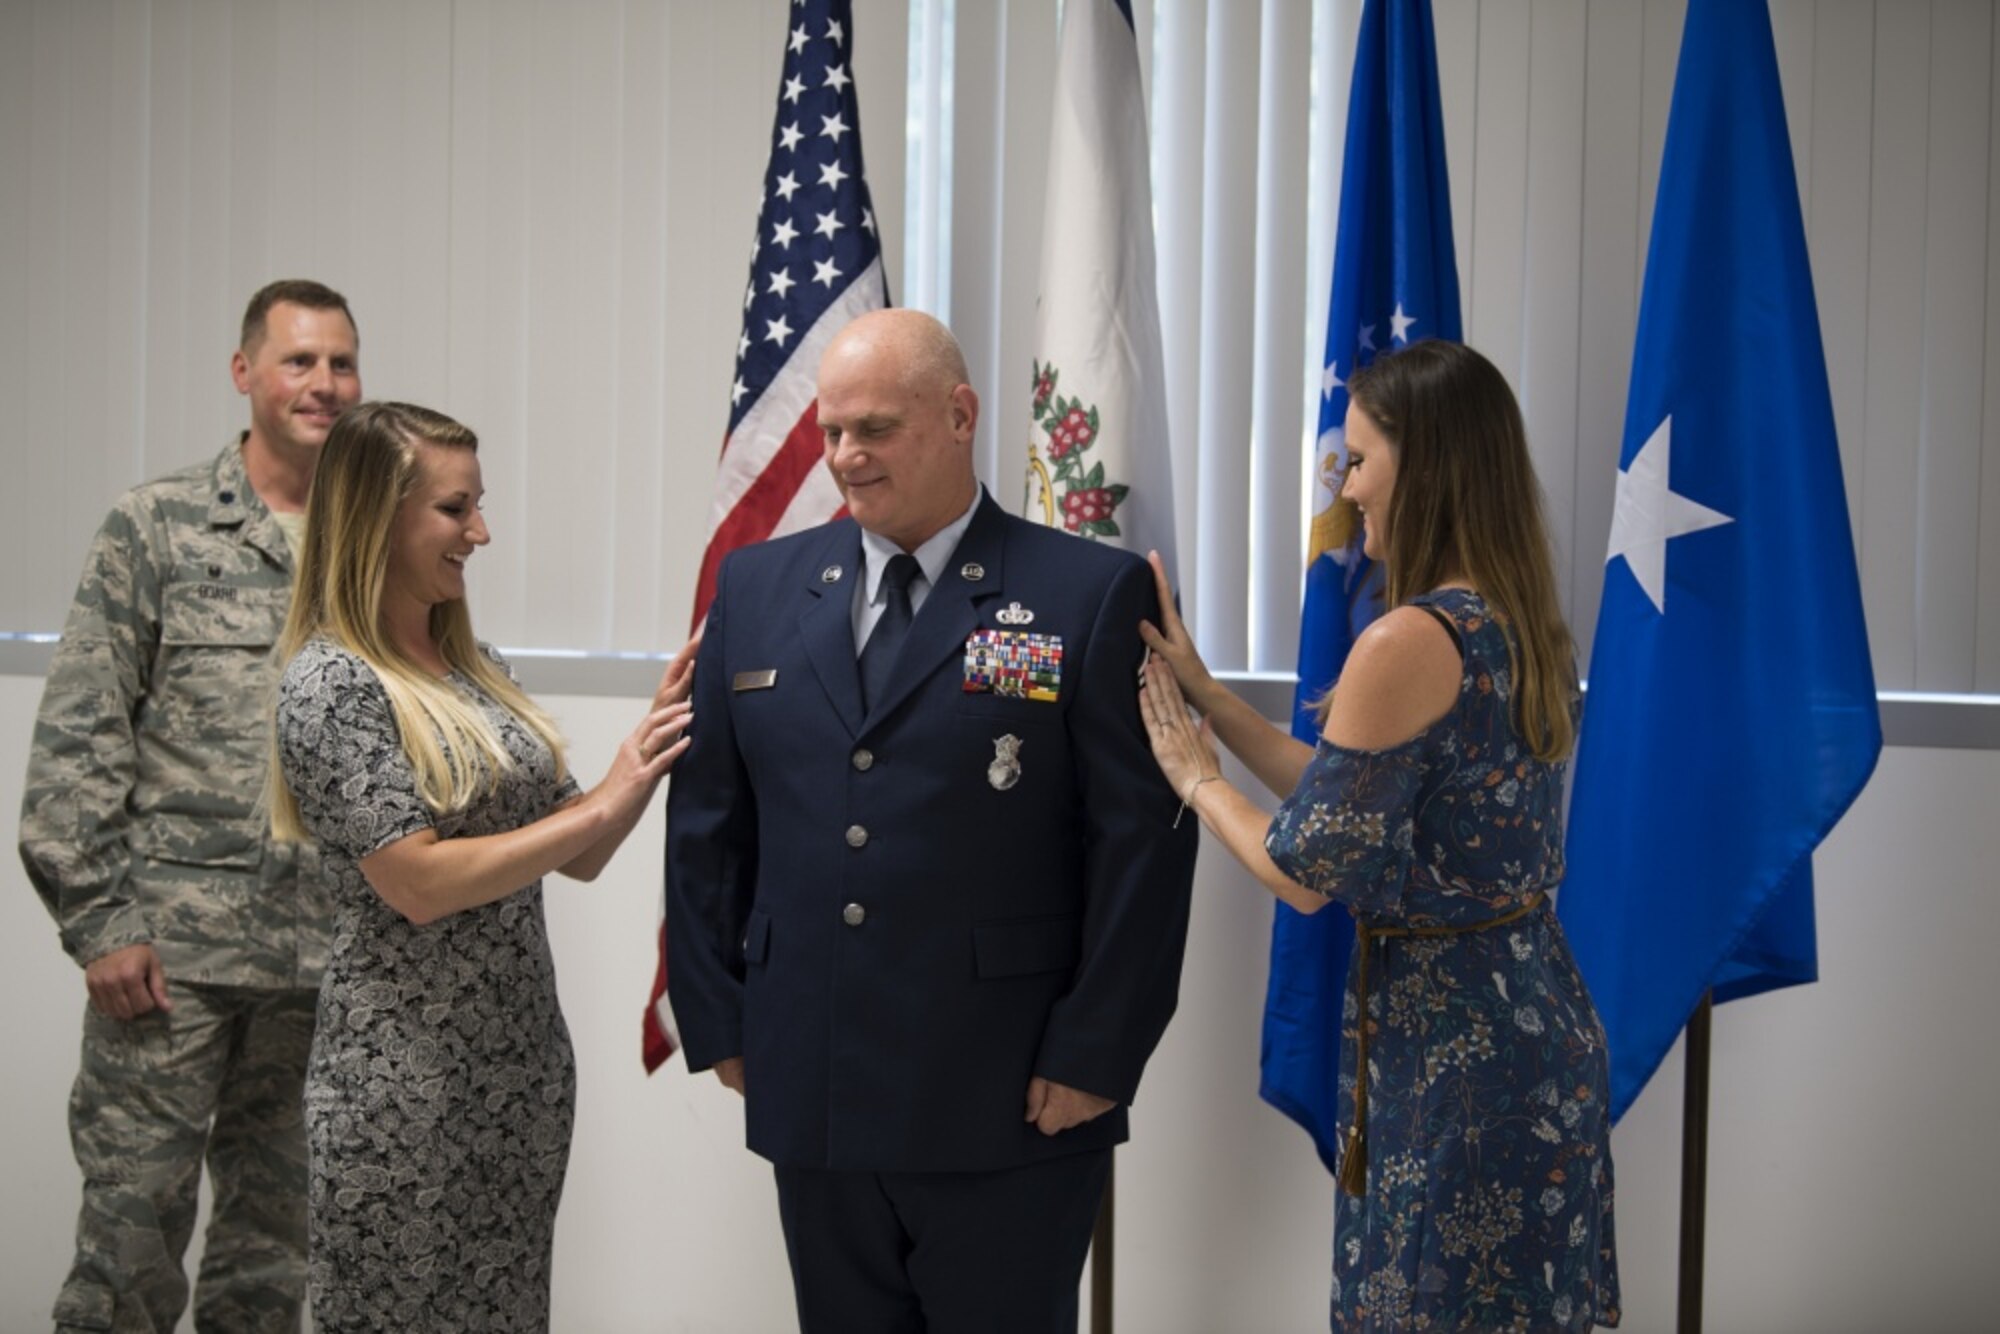 Chief Master Sgt. P. Wayne Hughes stands as his daughters affix his new rank onto his uniform June 3, 2017 during a promotion ceremony held in his honor at McLaughlin Air National Guard Base, Charleston, W.Va. Hughes is a 27-year veteran of Security Forces who will assume the role of chief enlisted manager with this promotion. (U.S. Air National Guard photo by Capt. Holli Nelson) 